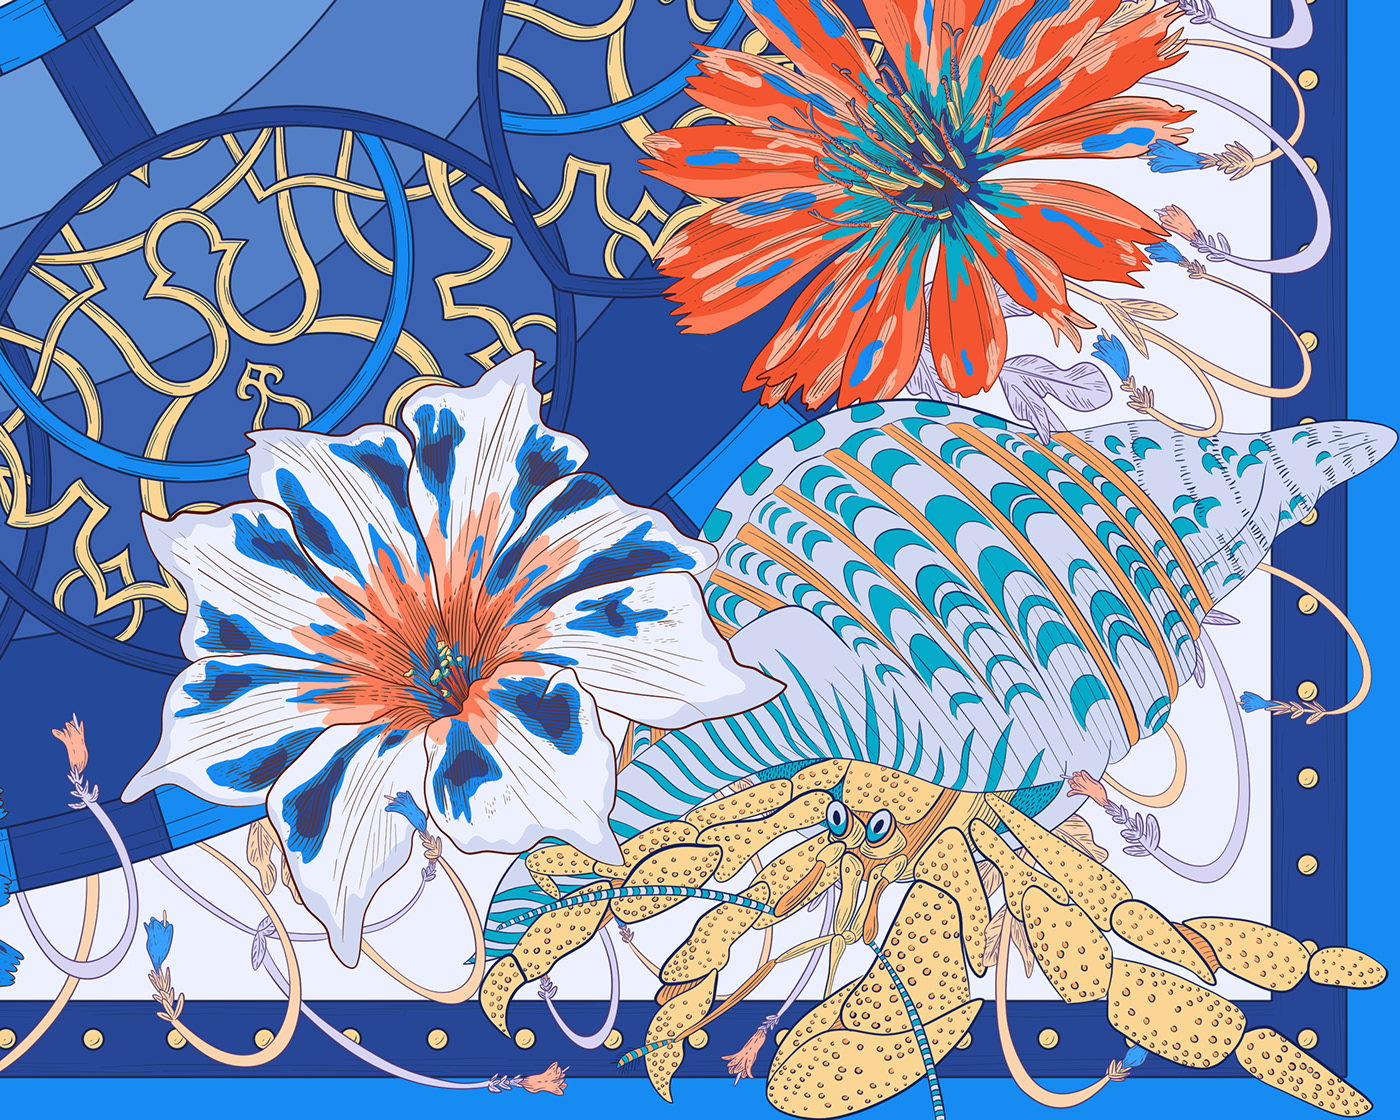 Textile design of a blue hermit crab next to a flower on the corner of silk scarf design.